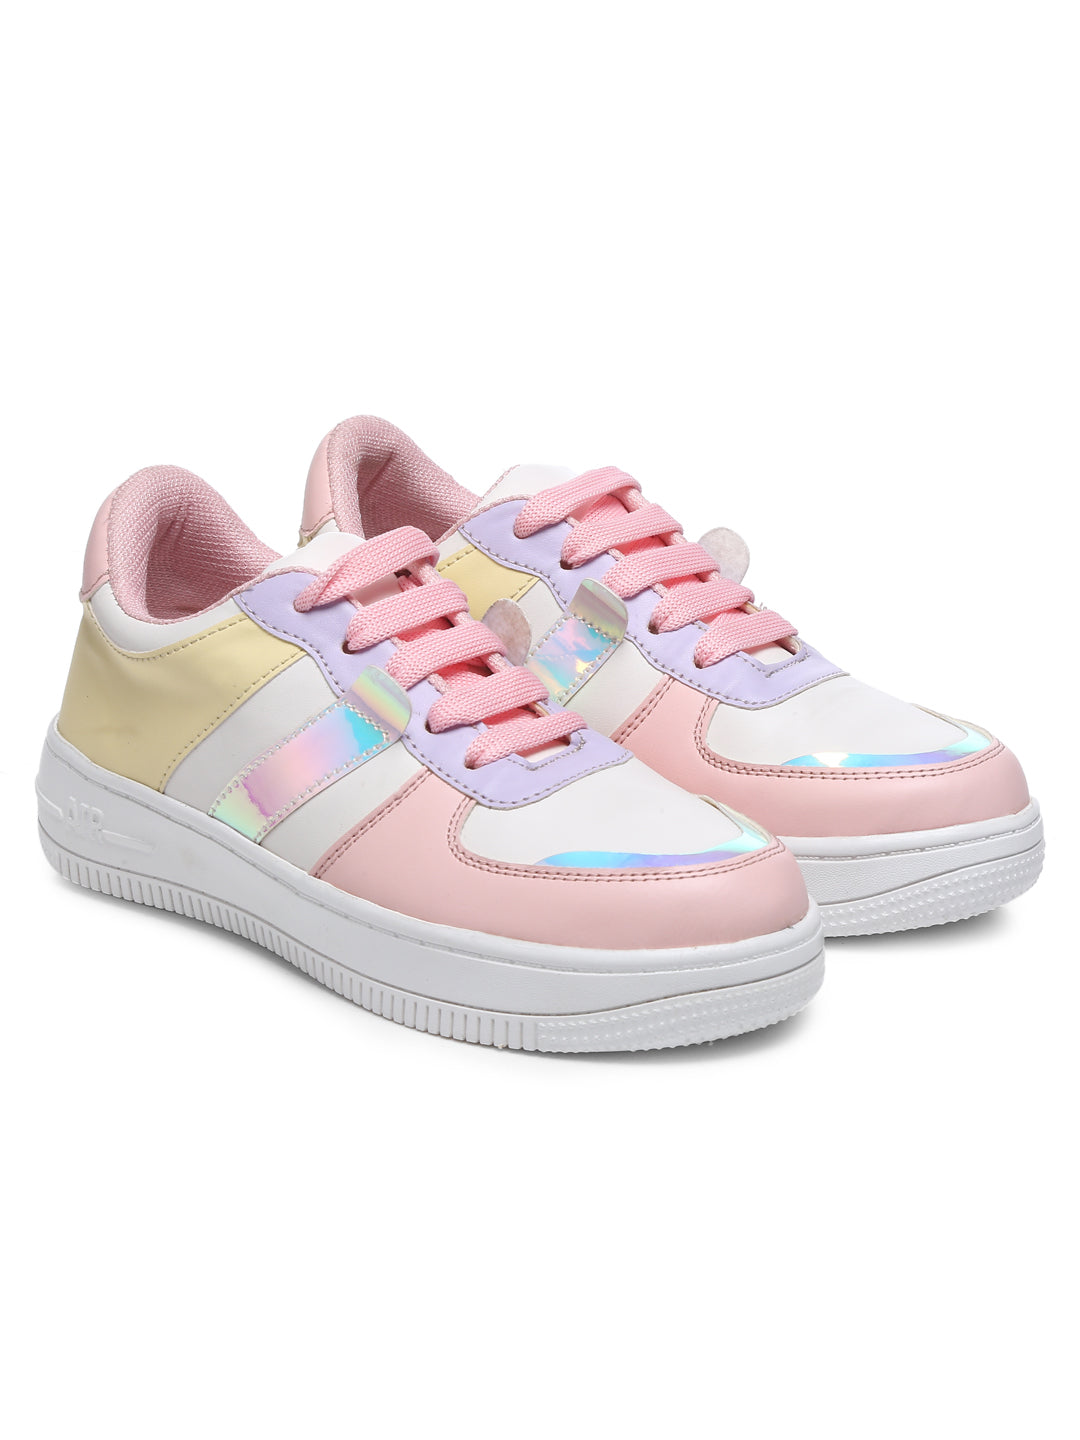 GNIST White Pink Colour Blocked Sneakers